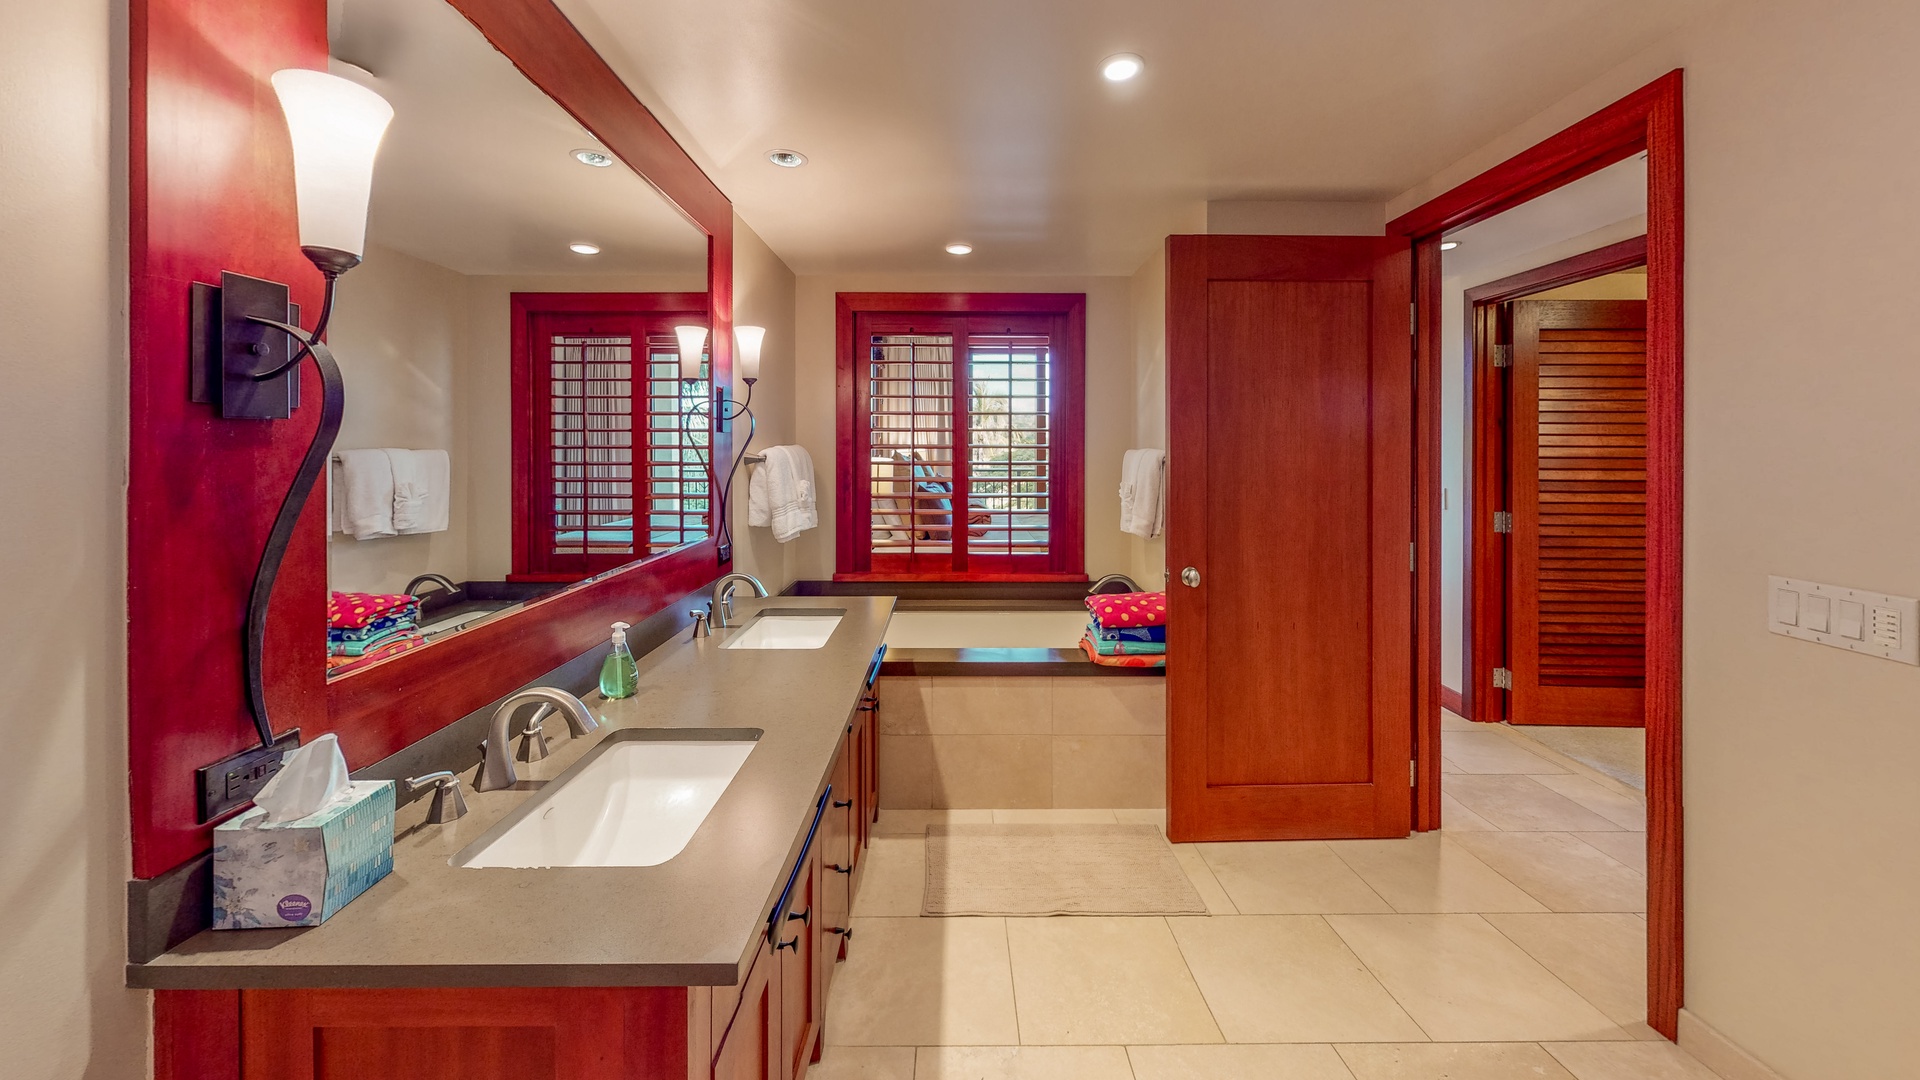 Kapolei Vacation Rentals, Ko Olina Beach Villas O401 - The spacious primary guest bath where you can relax and unwind.